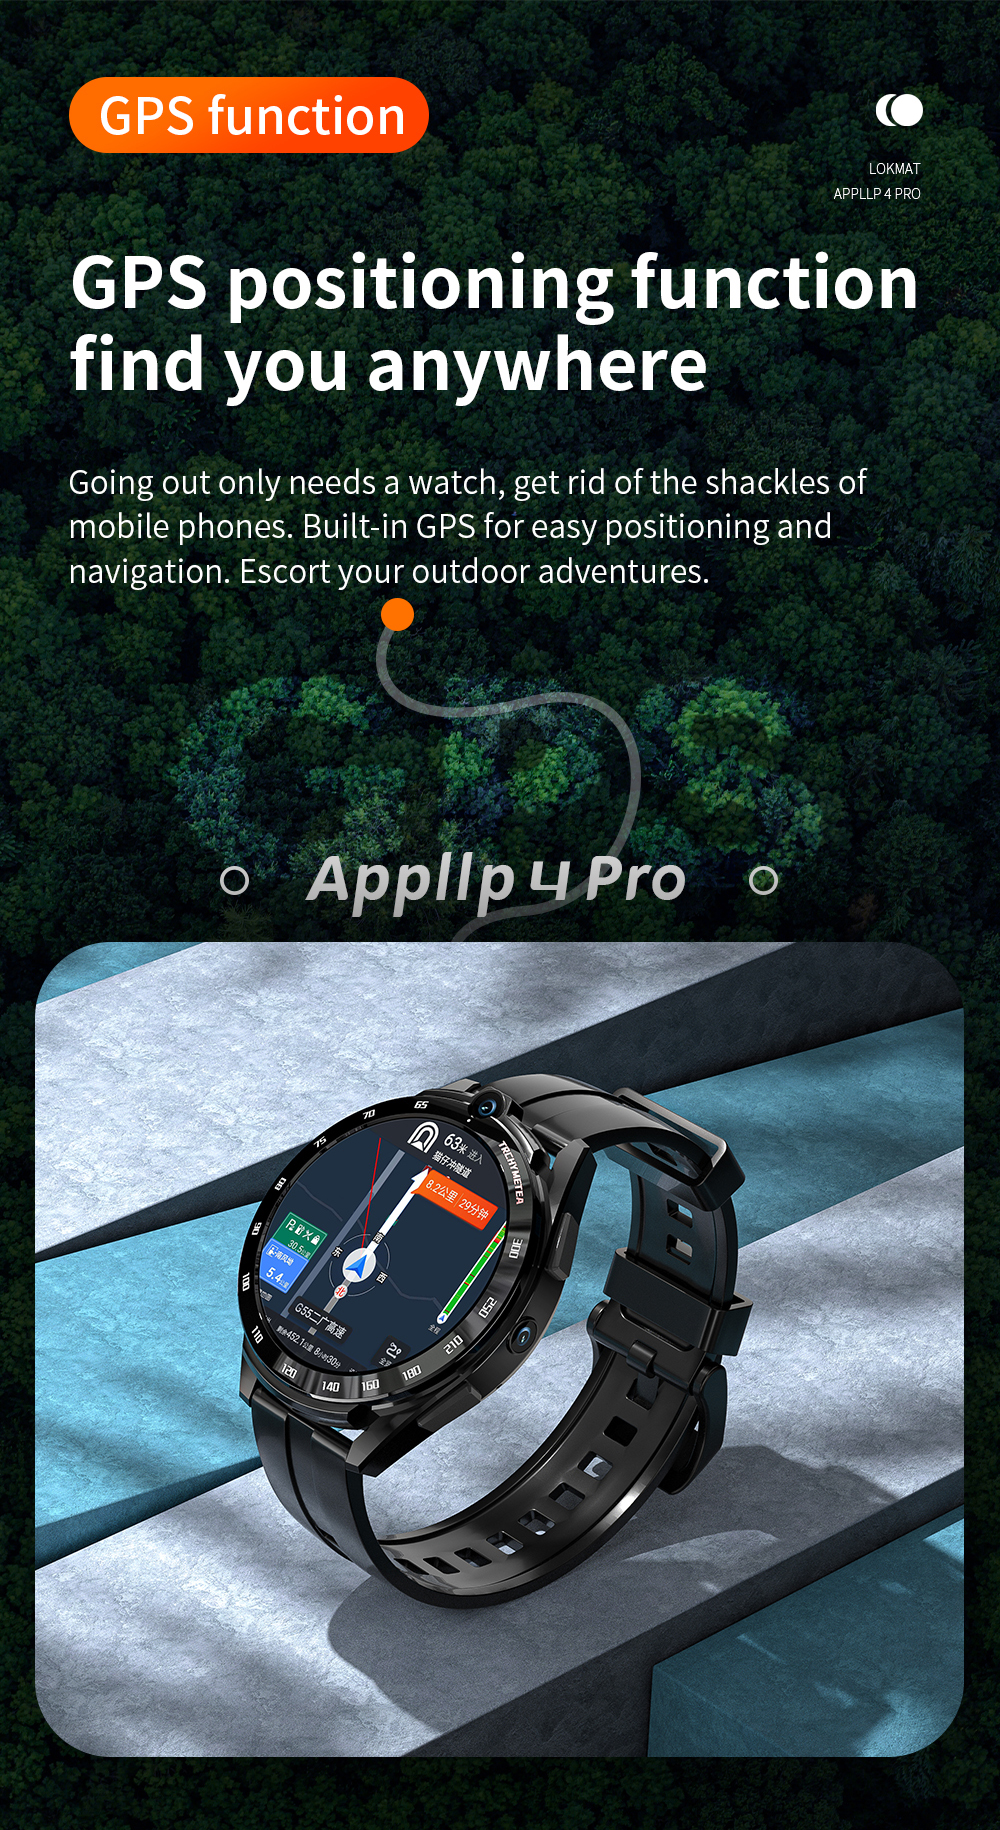 [Dual Mode Dual Chip] LOKMAT APPLLP 4 Pro 1.6 inch 400*400px Screen Octa-core 6G+128G Android Smartwatch SIM Card WiFi Dual Cameras GPS Positioning Newest Android 11 System 4G LTE Smart Watch Phone